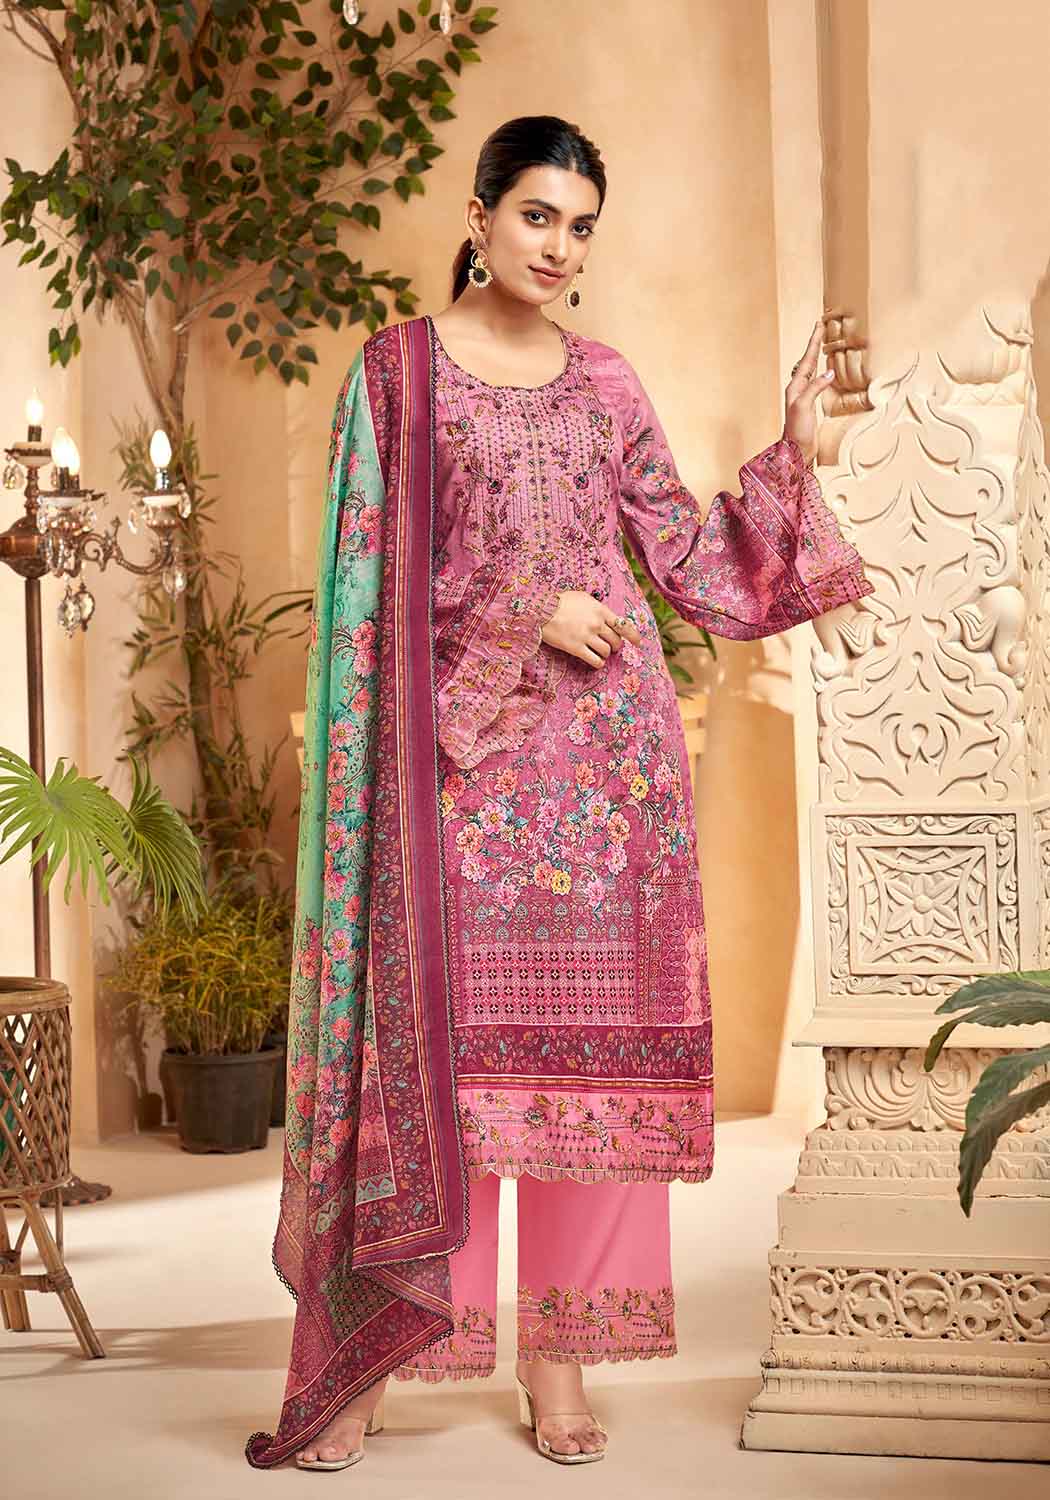 Unstitched Pakistani Print Cotton Suit Material with Embroidery Pink